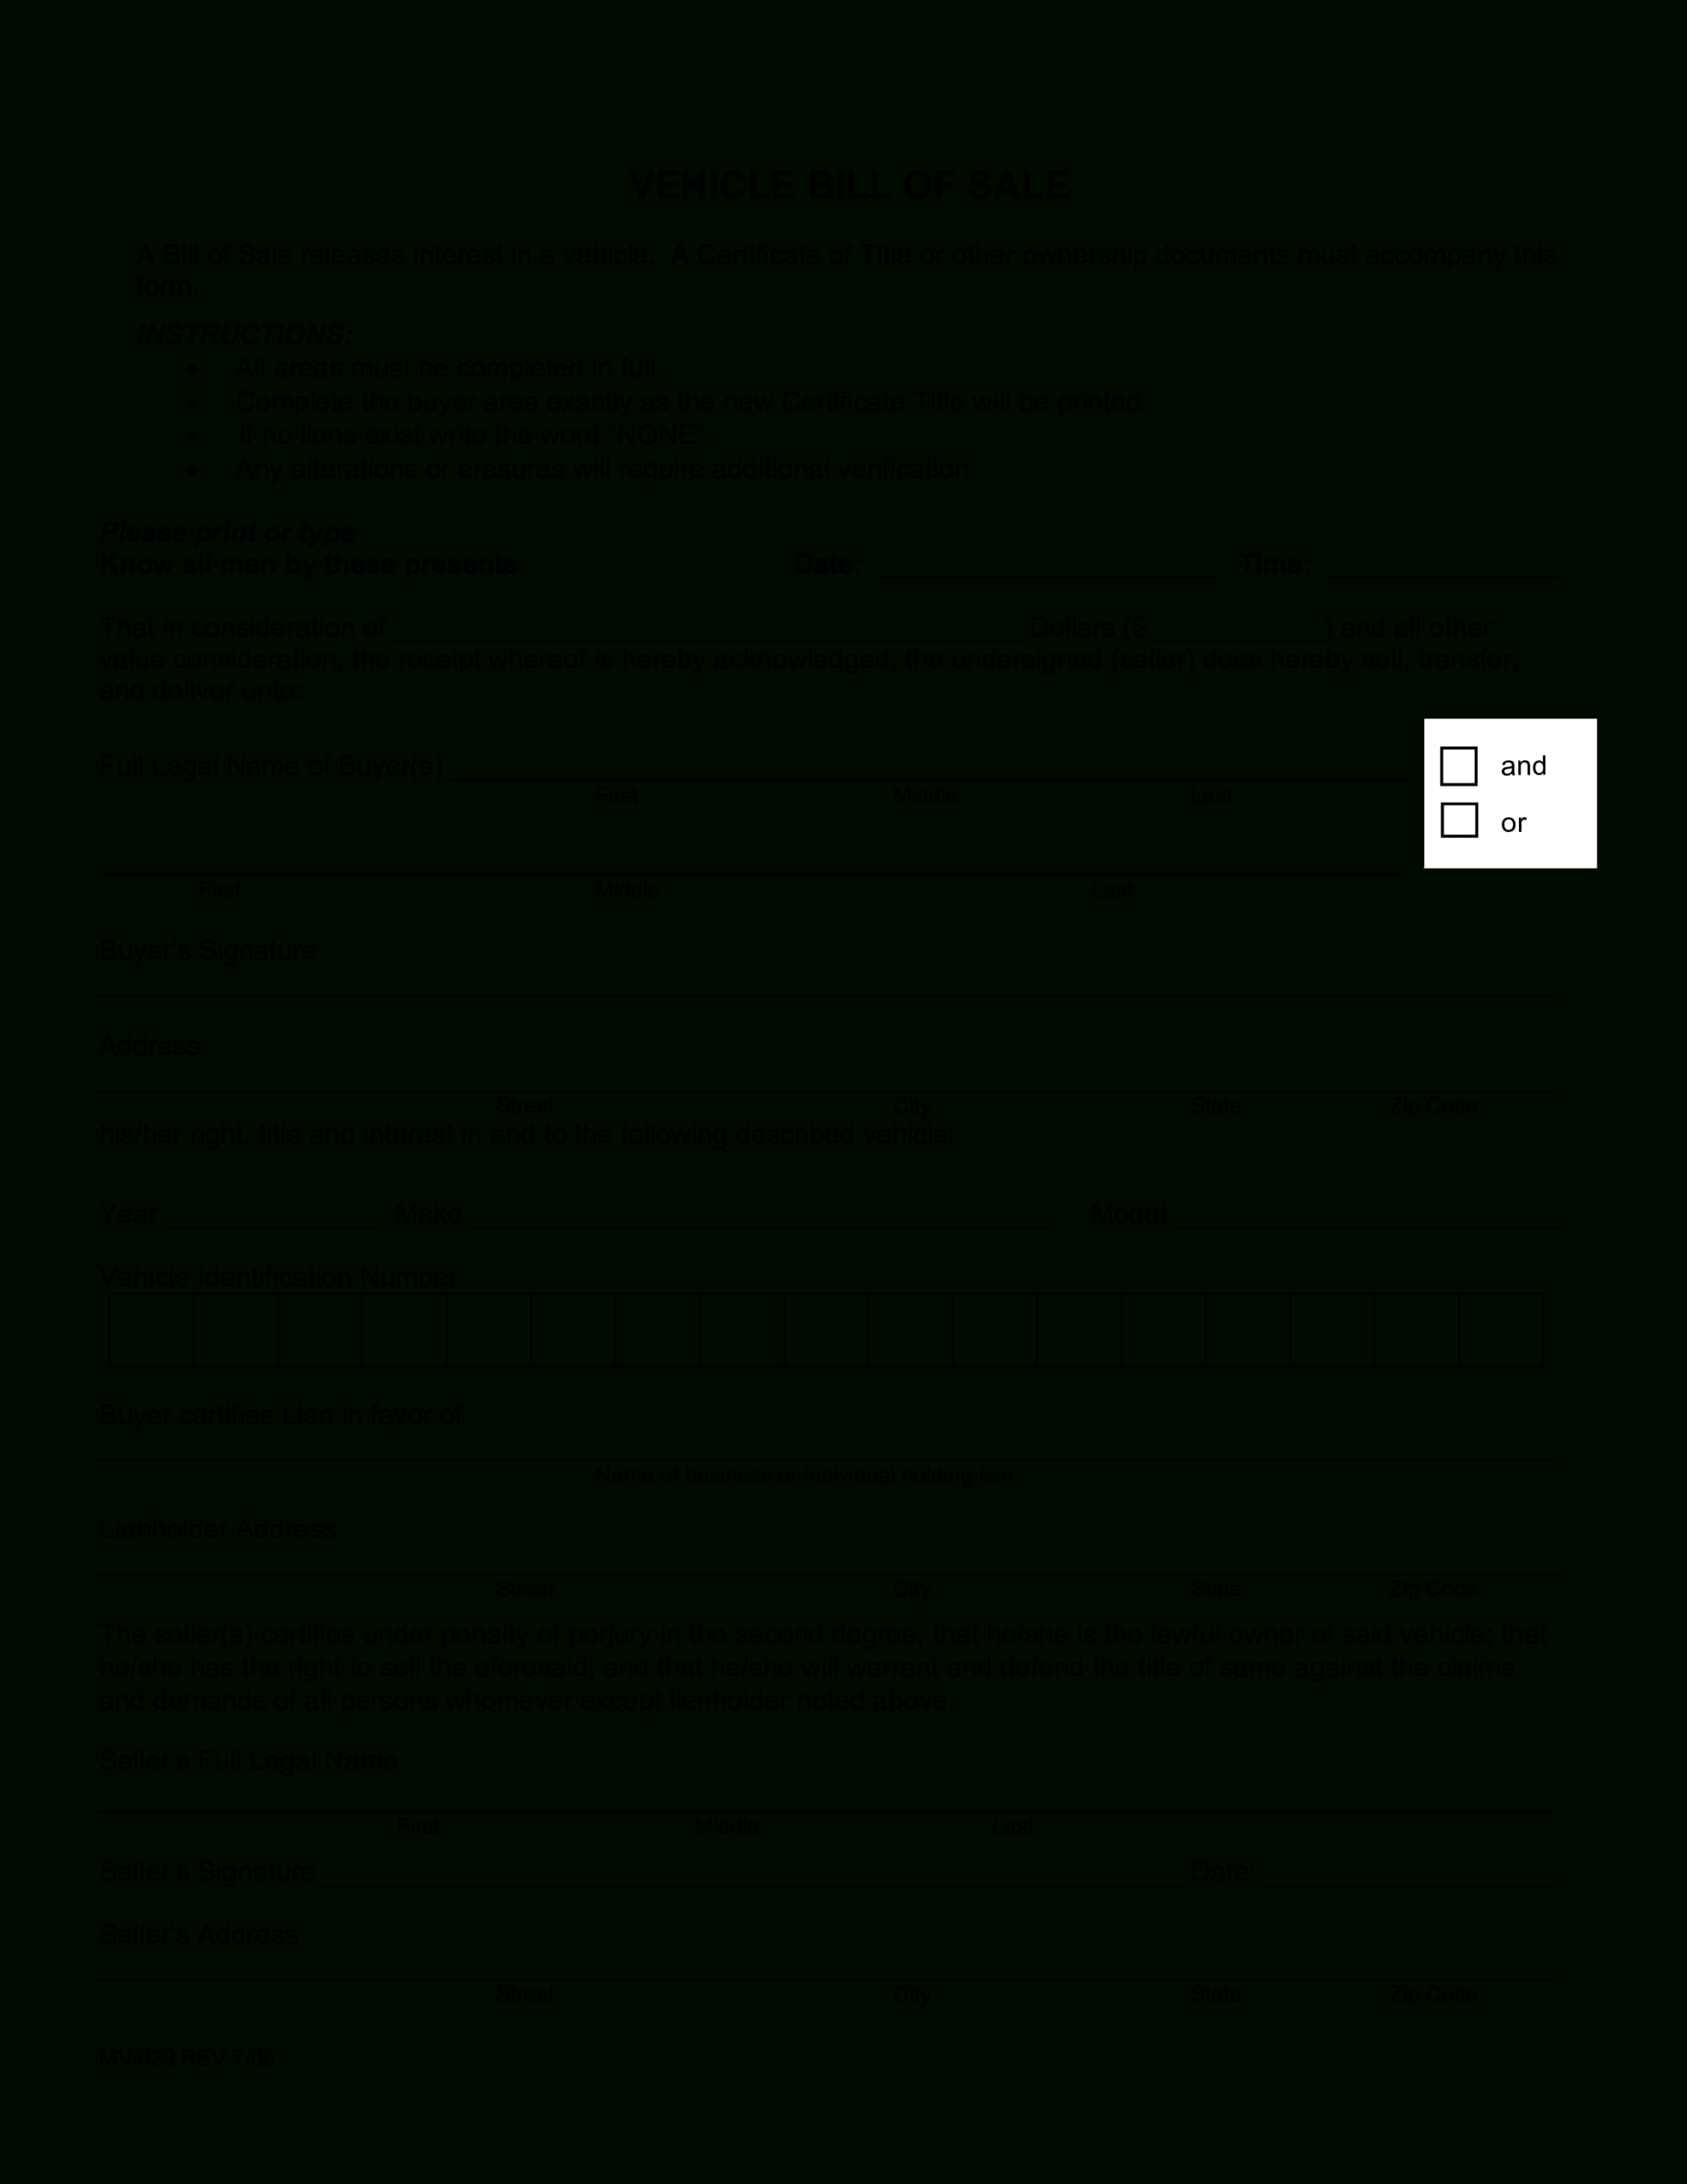 Legal Blank Bill Of Sale | Templates At Allbusinesstemplates Inside Blank Legal Document Template